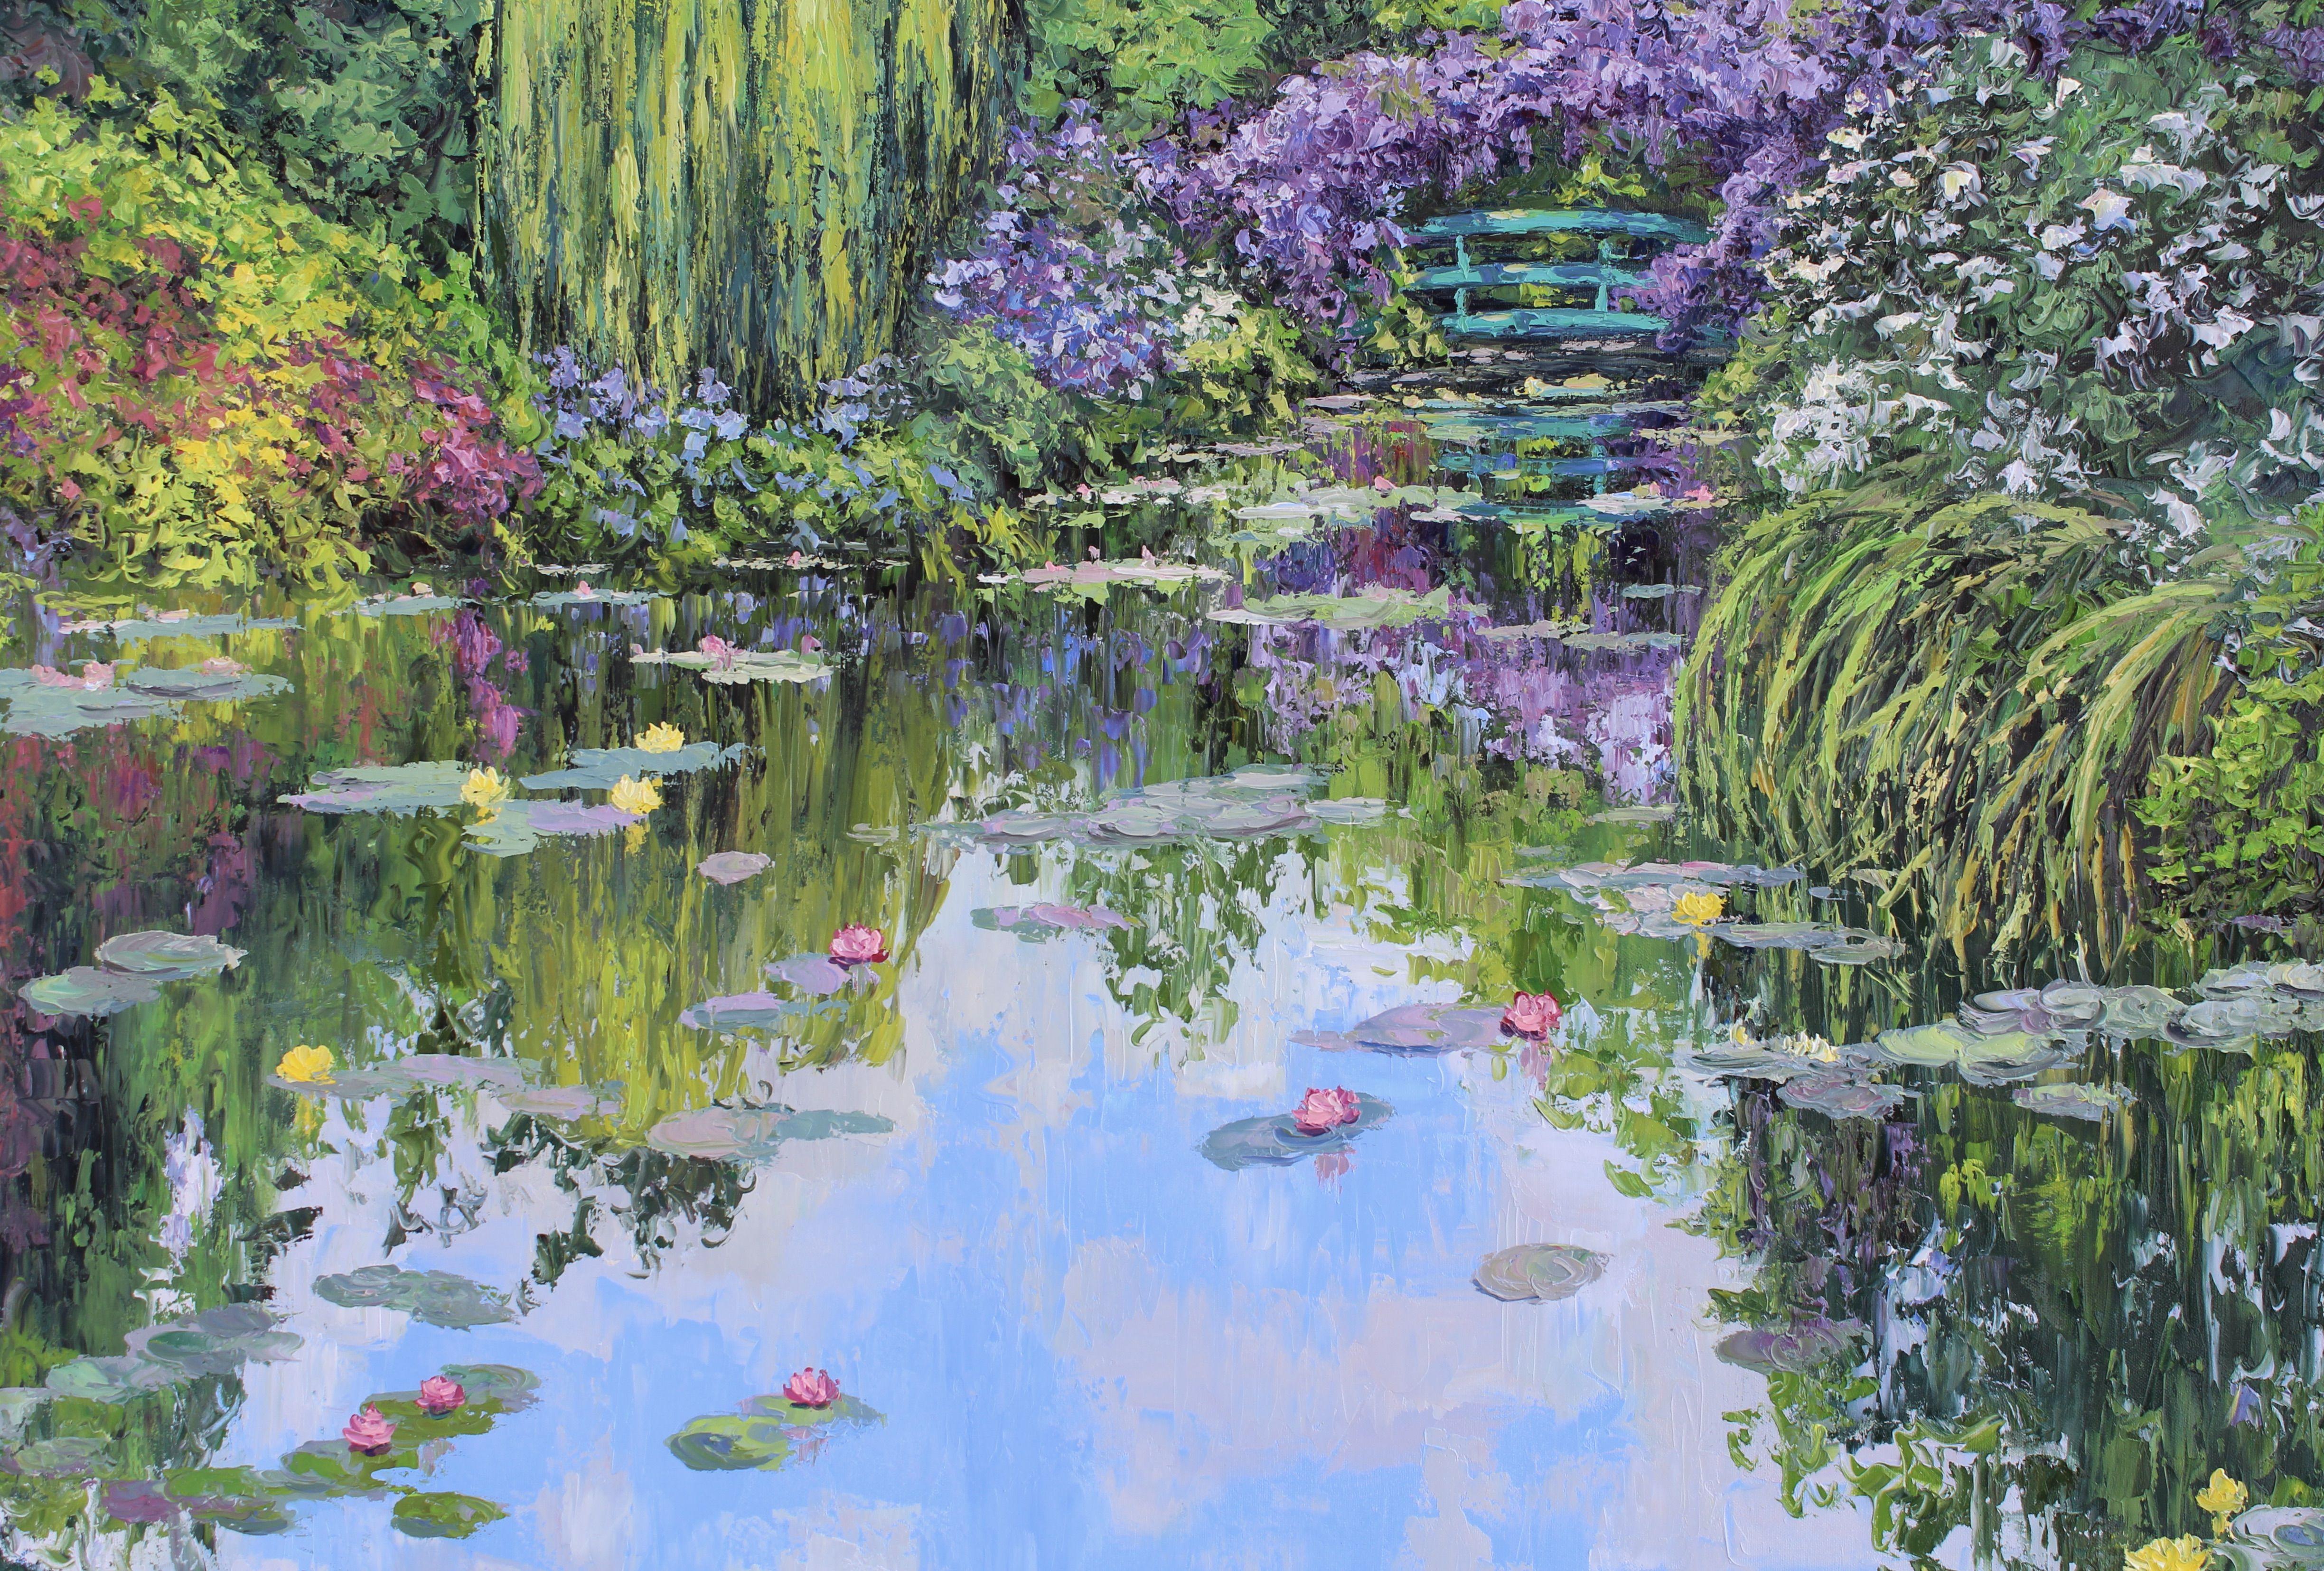 An extra large original water lily pond original oil painting of Monet's beloved Giverny. Willow trees and wisteria frame the far side of the pond while water lily pads and water lily flowers slowly seem to drift forward over the calming reflections